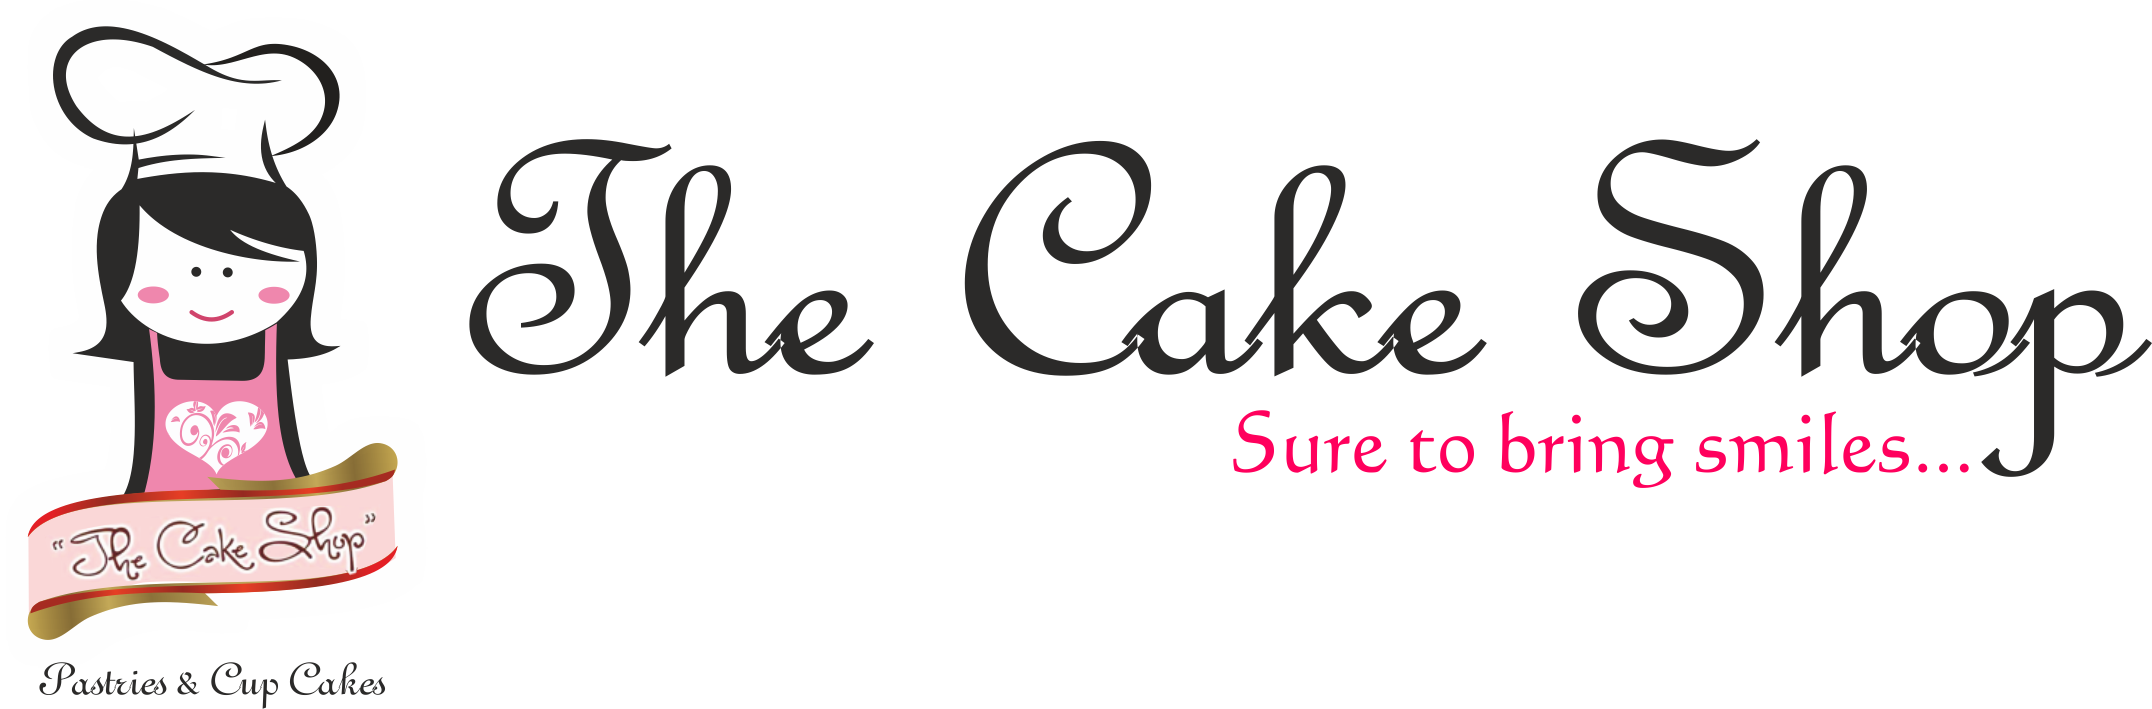 Event & Mobile Wholesale Supplies - The Great Cake Company